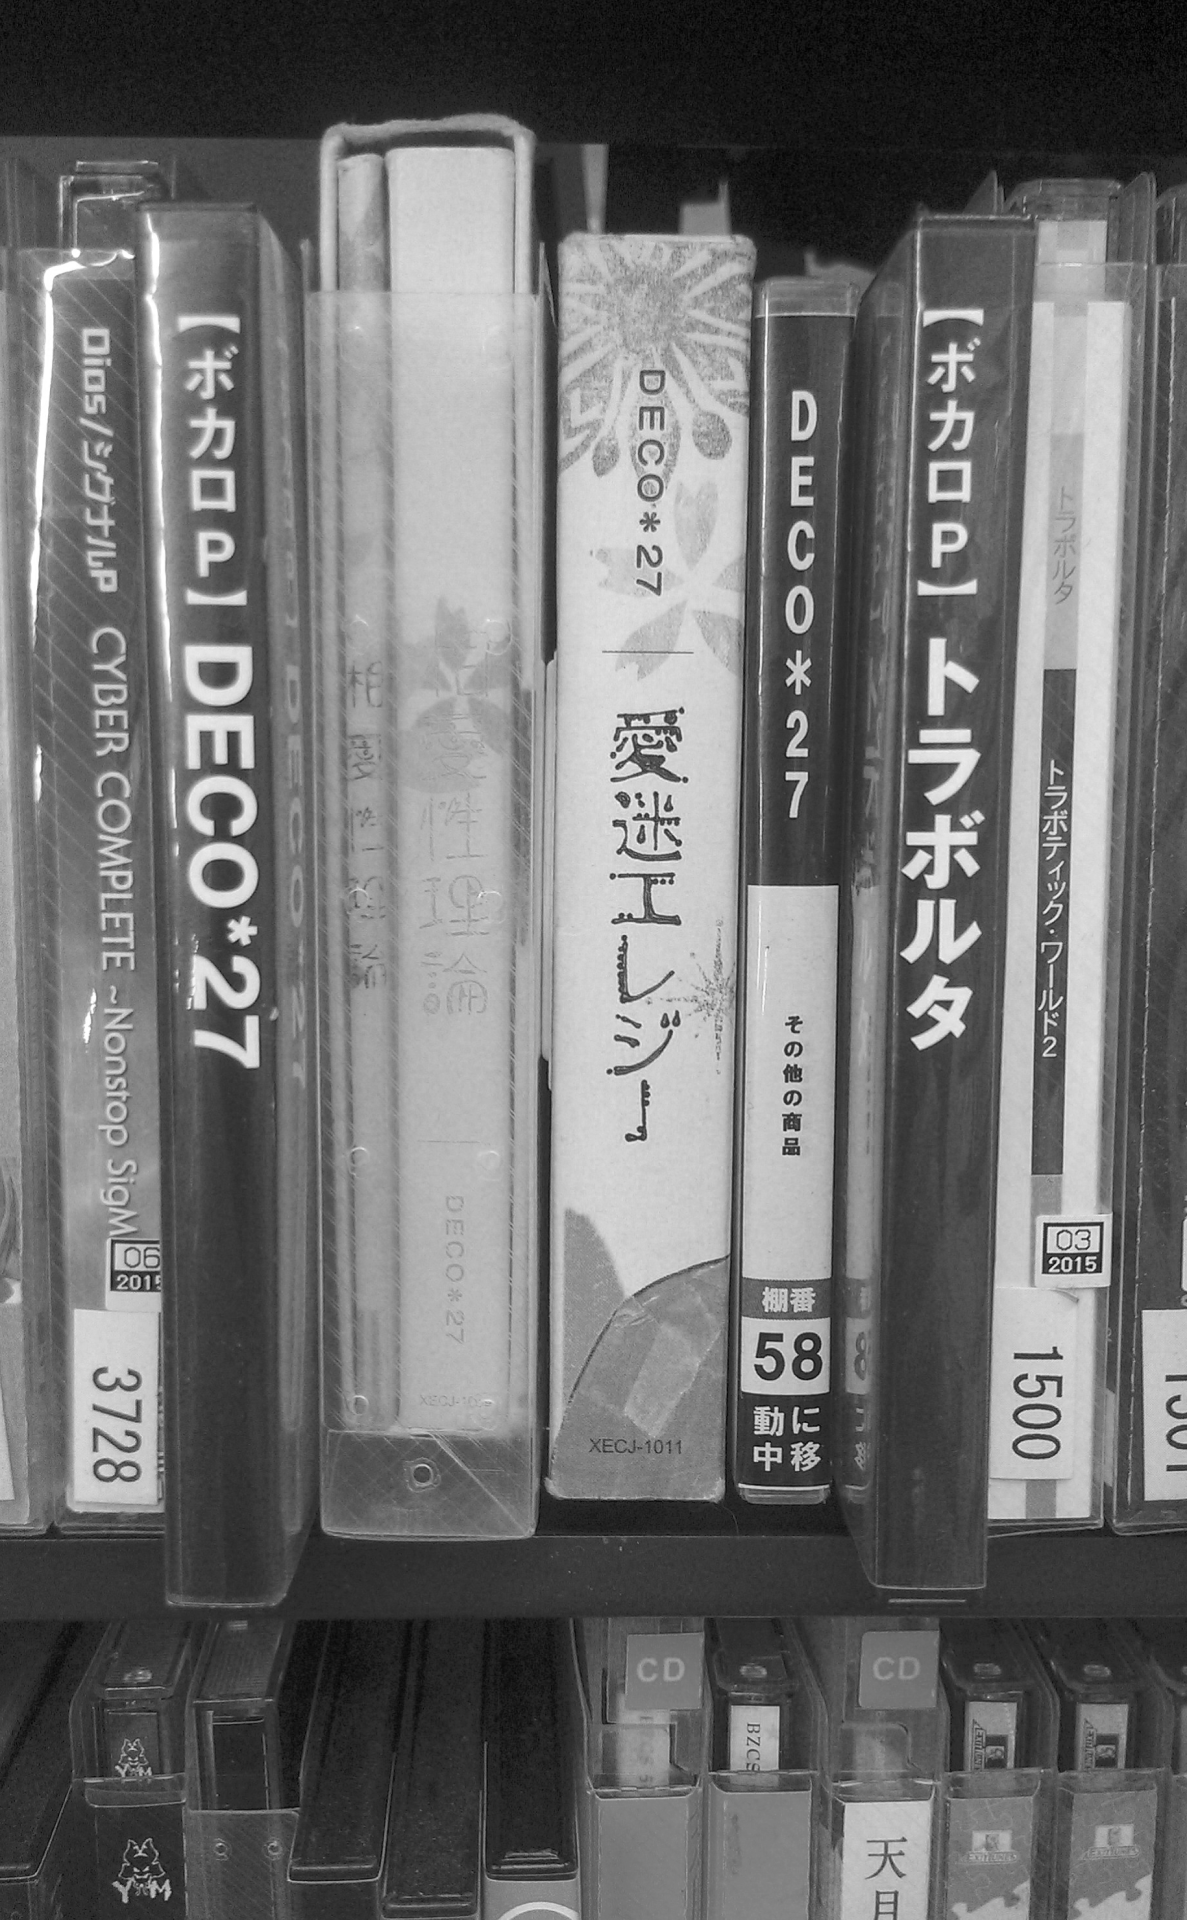 jeimusu:  Went to a Music and VideoGame Store today. Wanted to but so many CD’s 